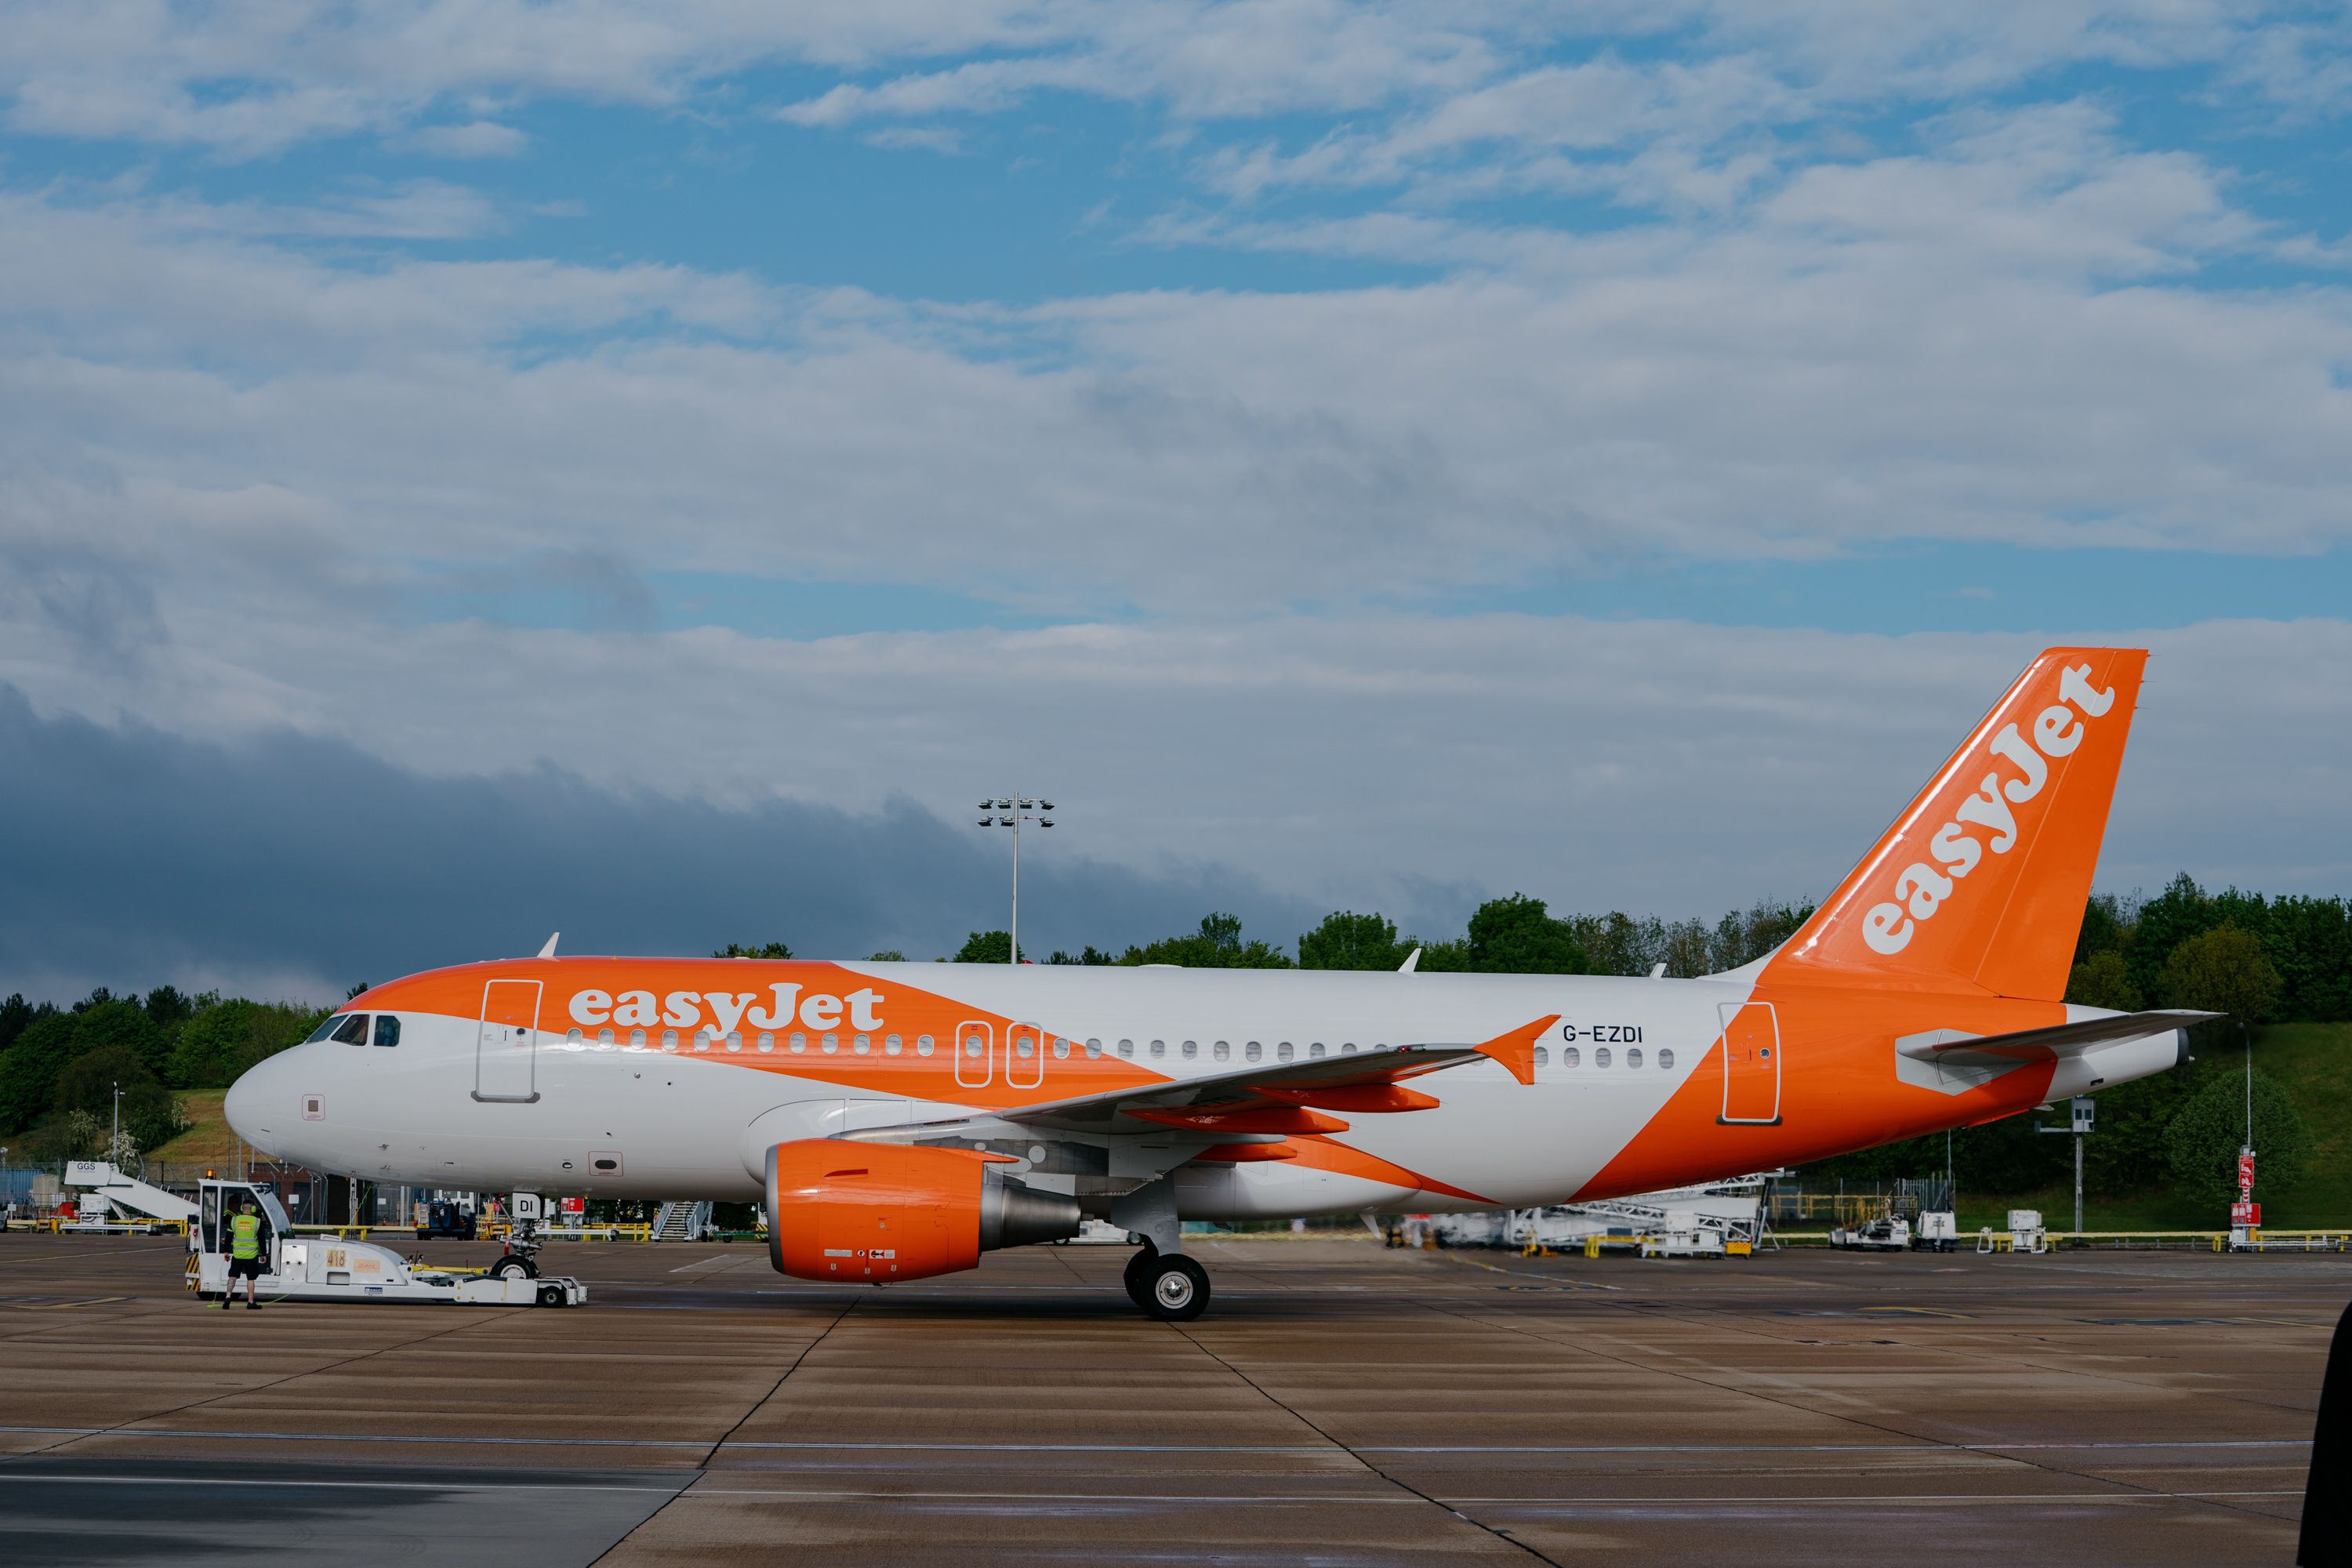 easyjet-relaunches-holiday-flights_51185605090_o